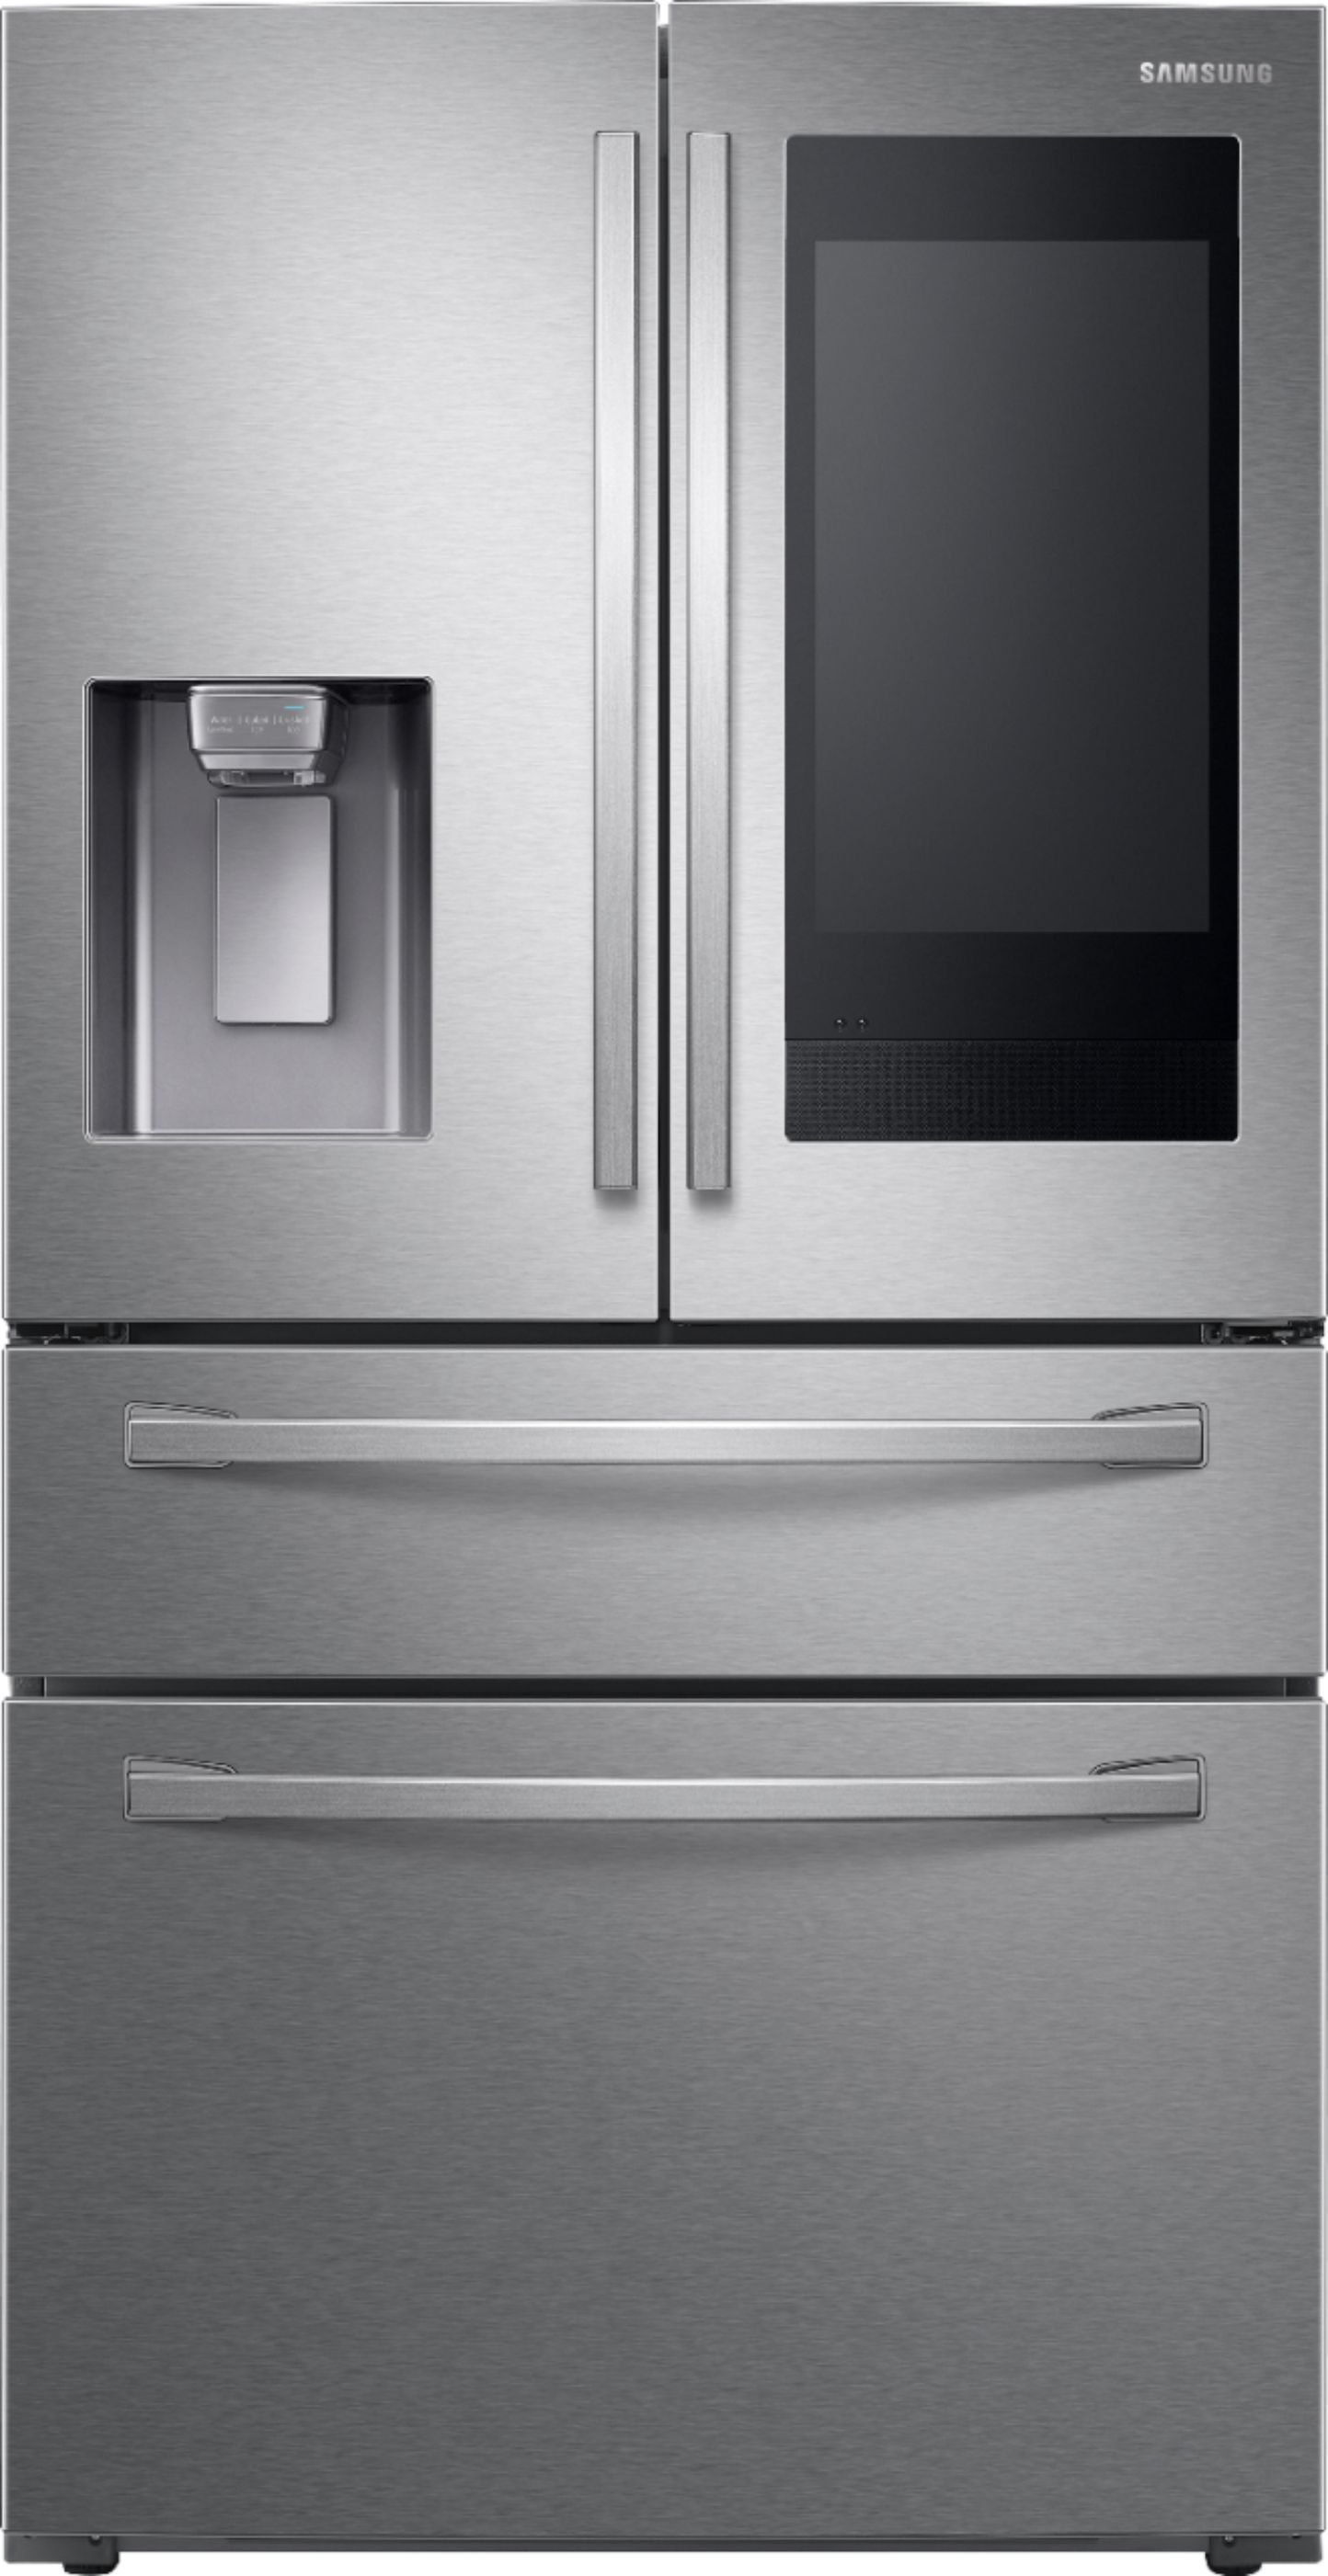 Samsung NV75J7570RS 75L Electric Oven with Dual Cook